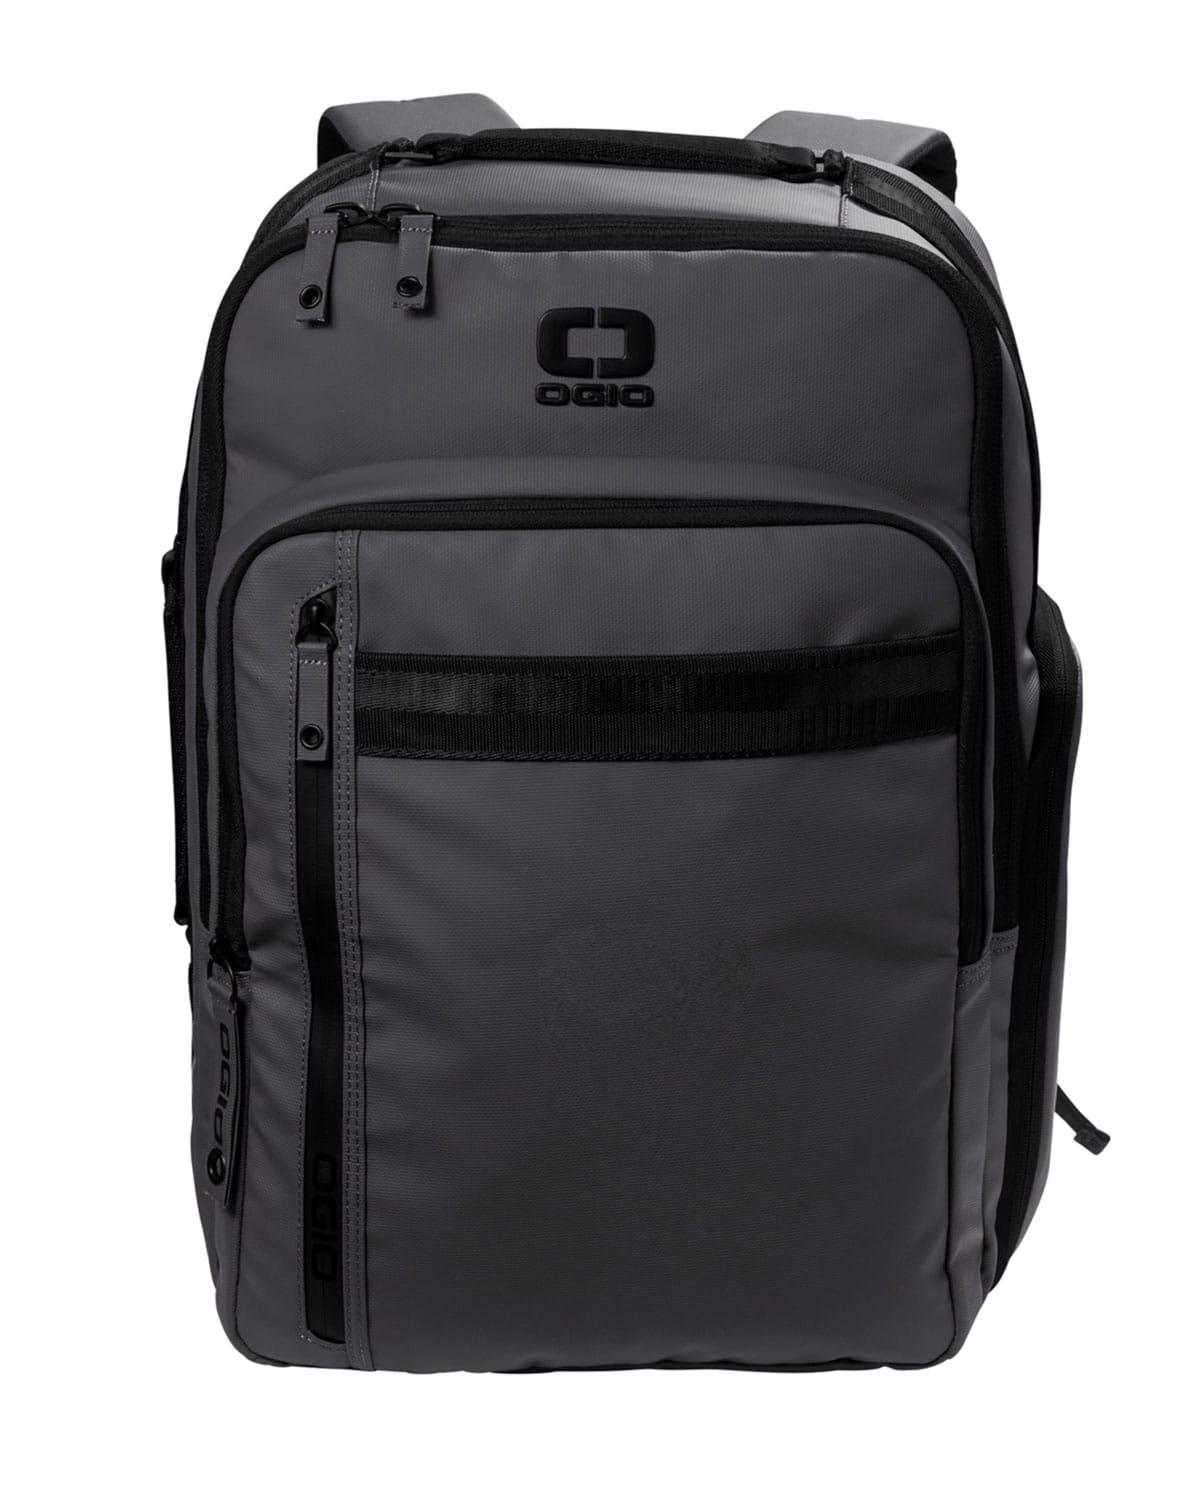 OGIO 91012 Commuter XL Pack